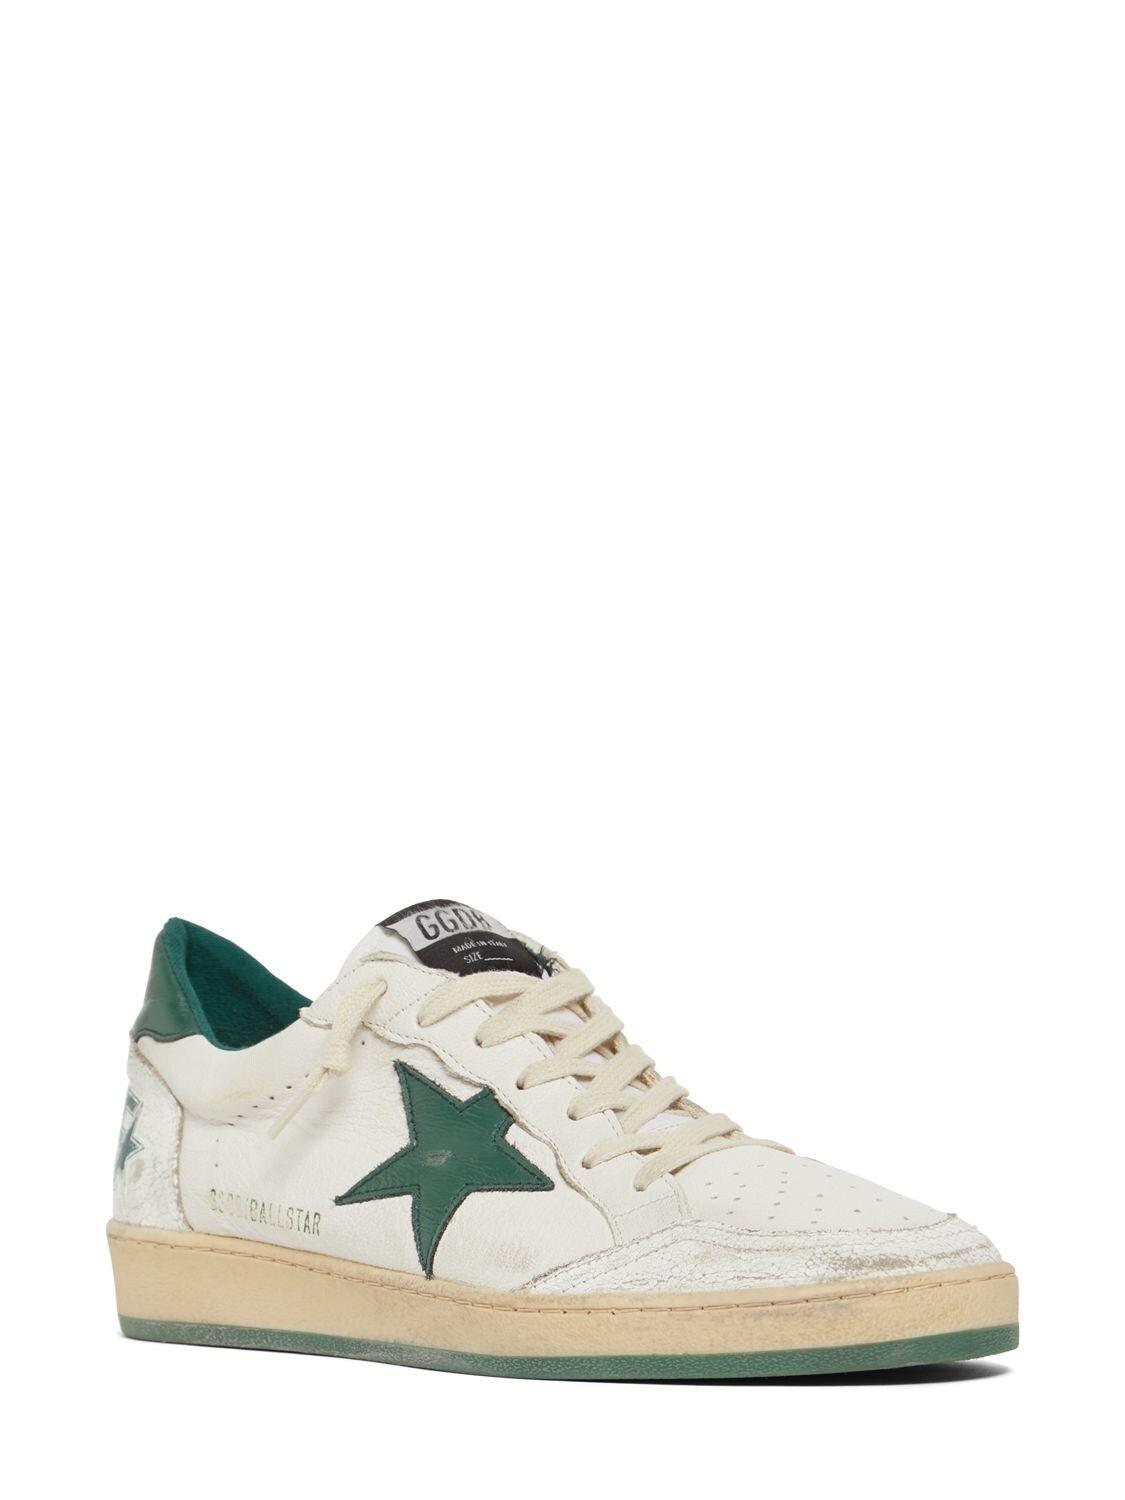 Shop Golden Goose Ball Star Nappa Leather & Nylon Sneakers In White,green